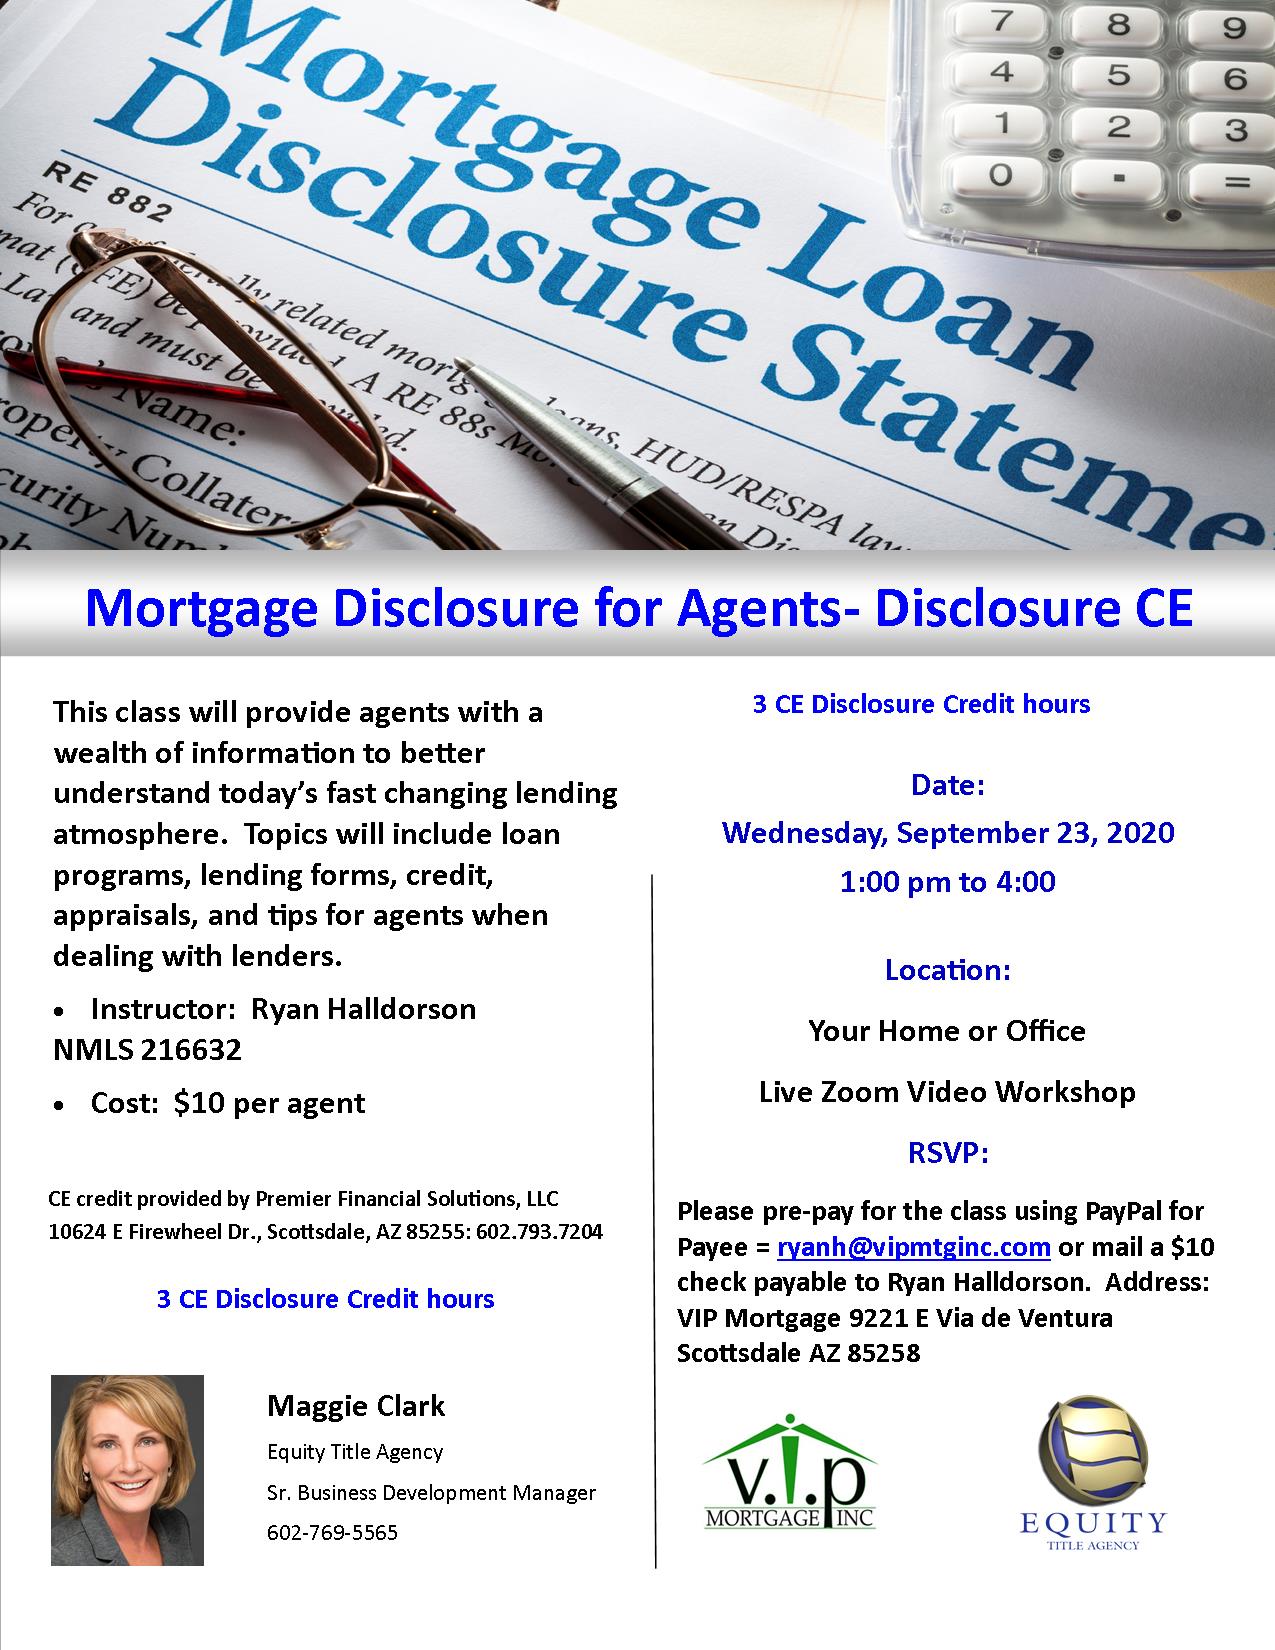 Sept 23 Mortgage Disclosures Maggie zoom